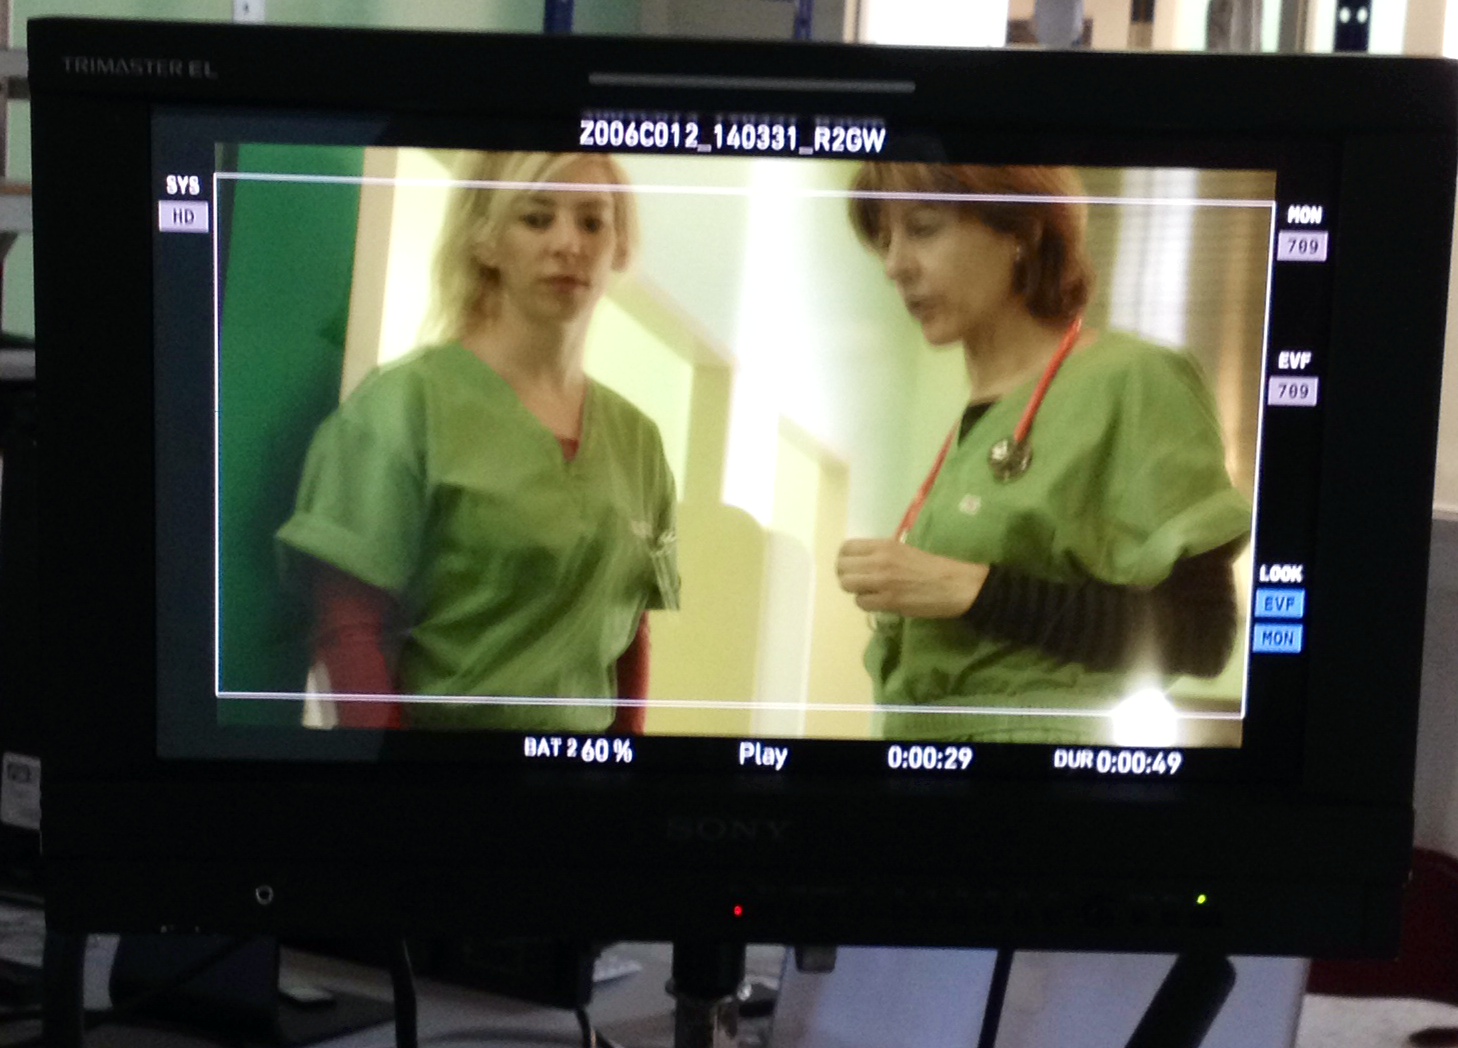 On the monitor on set with Sophie Lorain for her starring role in a new series called 